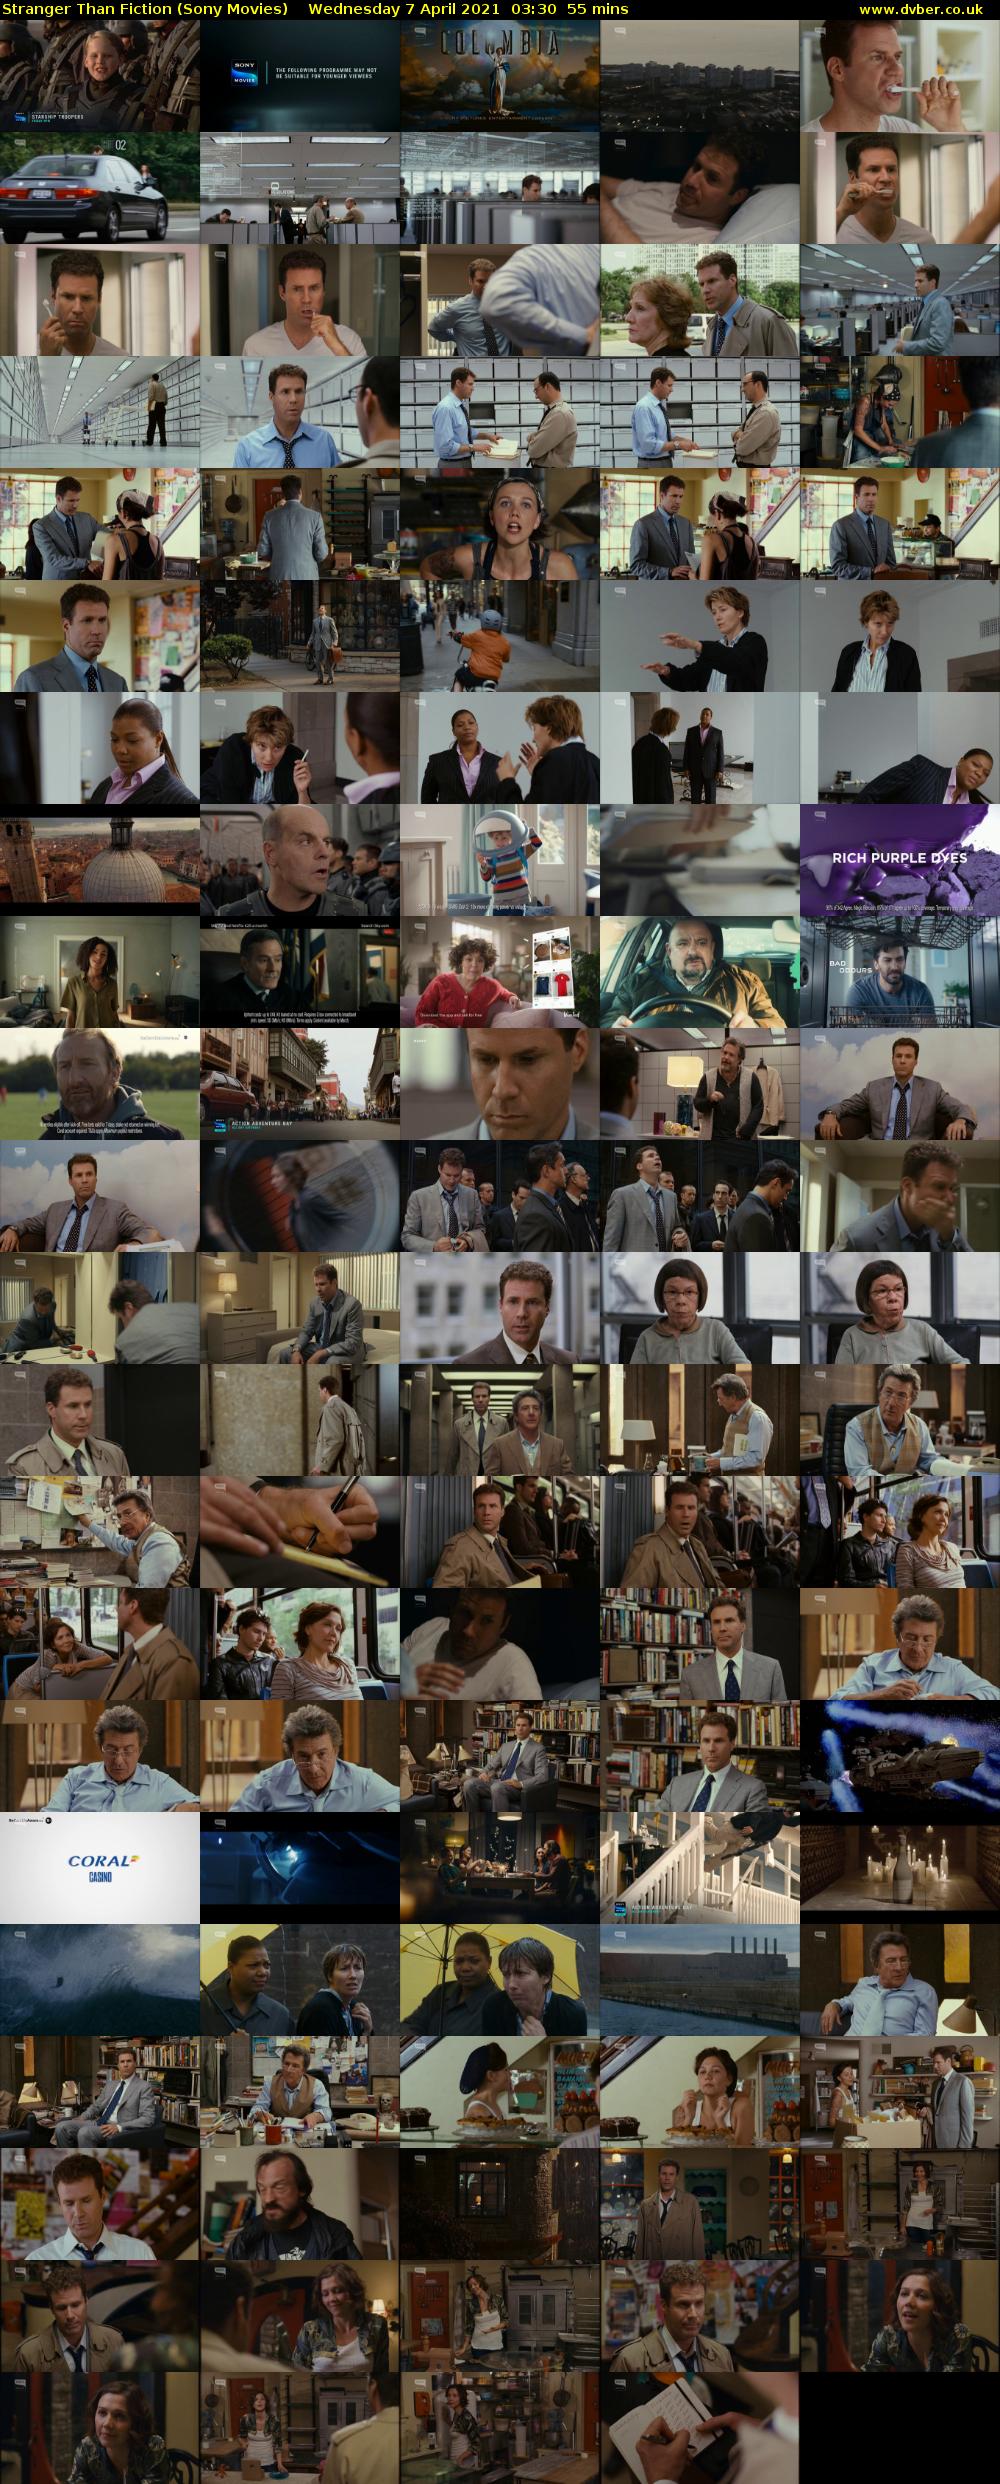 Stranger Than Fiction (Sony Movies) Wednesday 7 April 2021 03:30 - 04:25